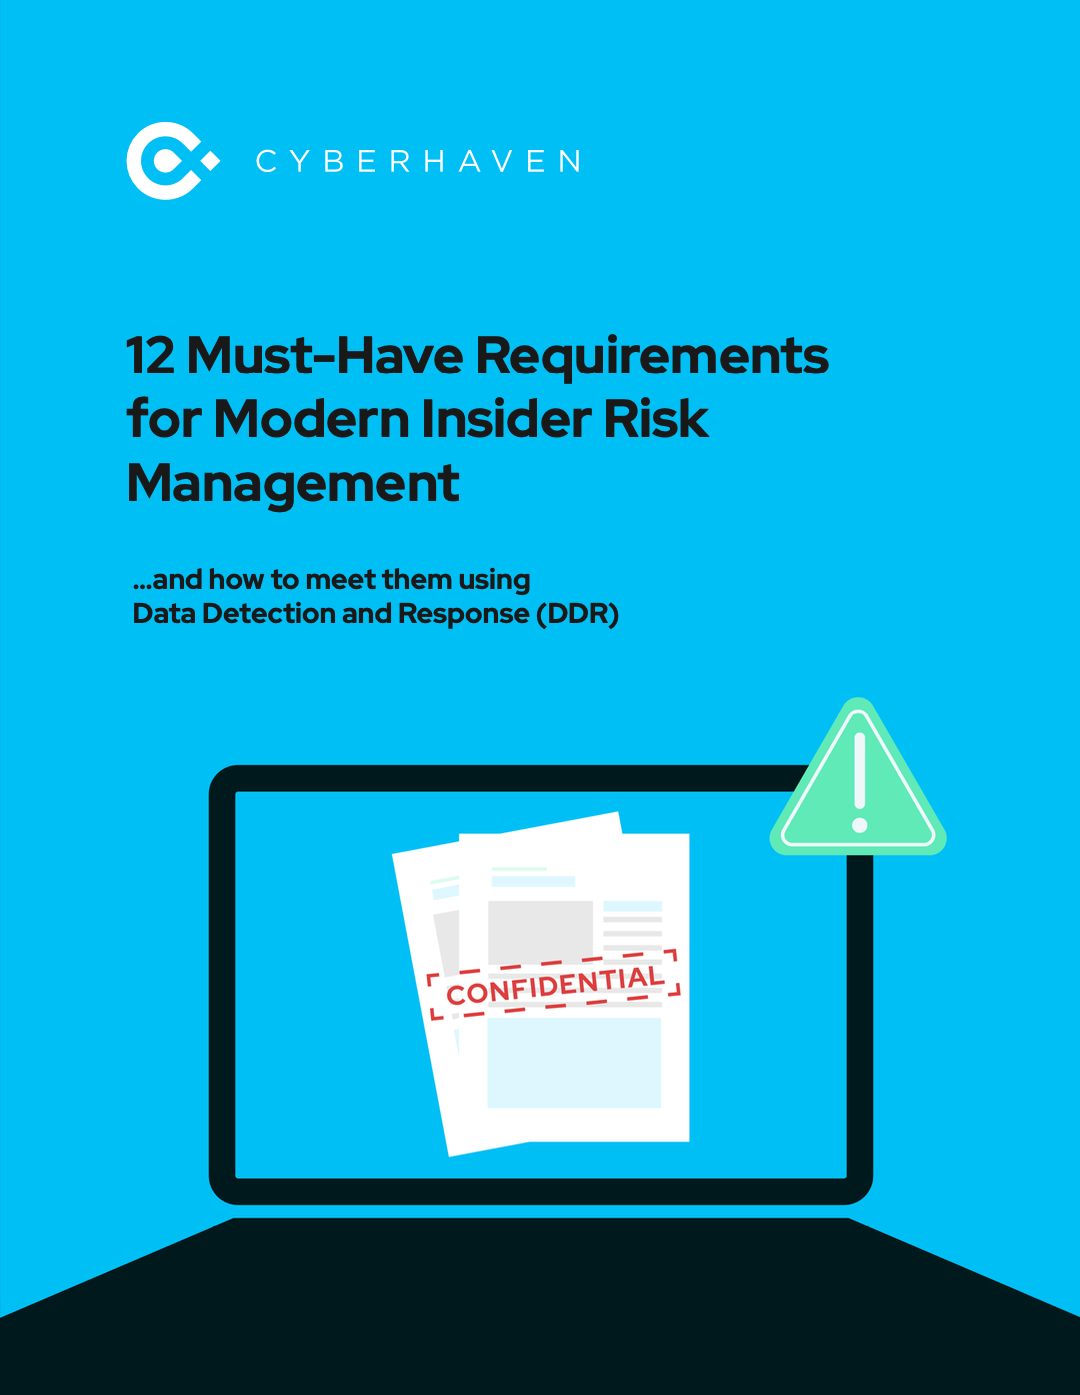 12 Must-Have Requirements for Modern Insider Risk Management